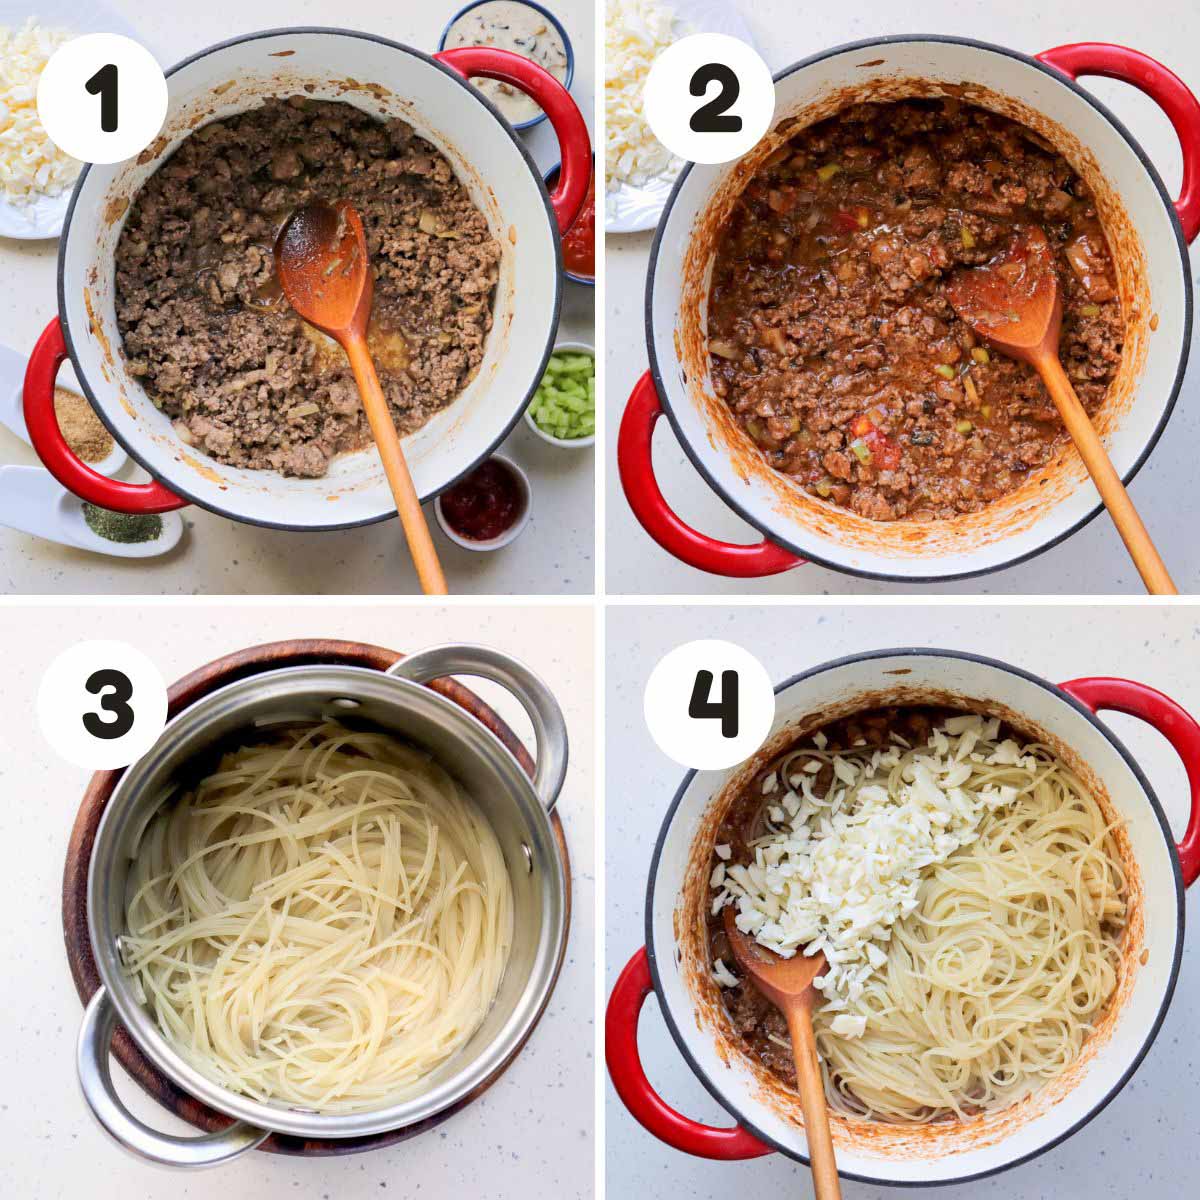 Steps to make the baked spaghetti.